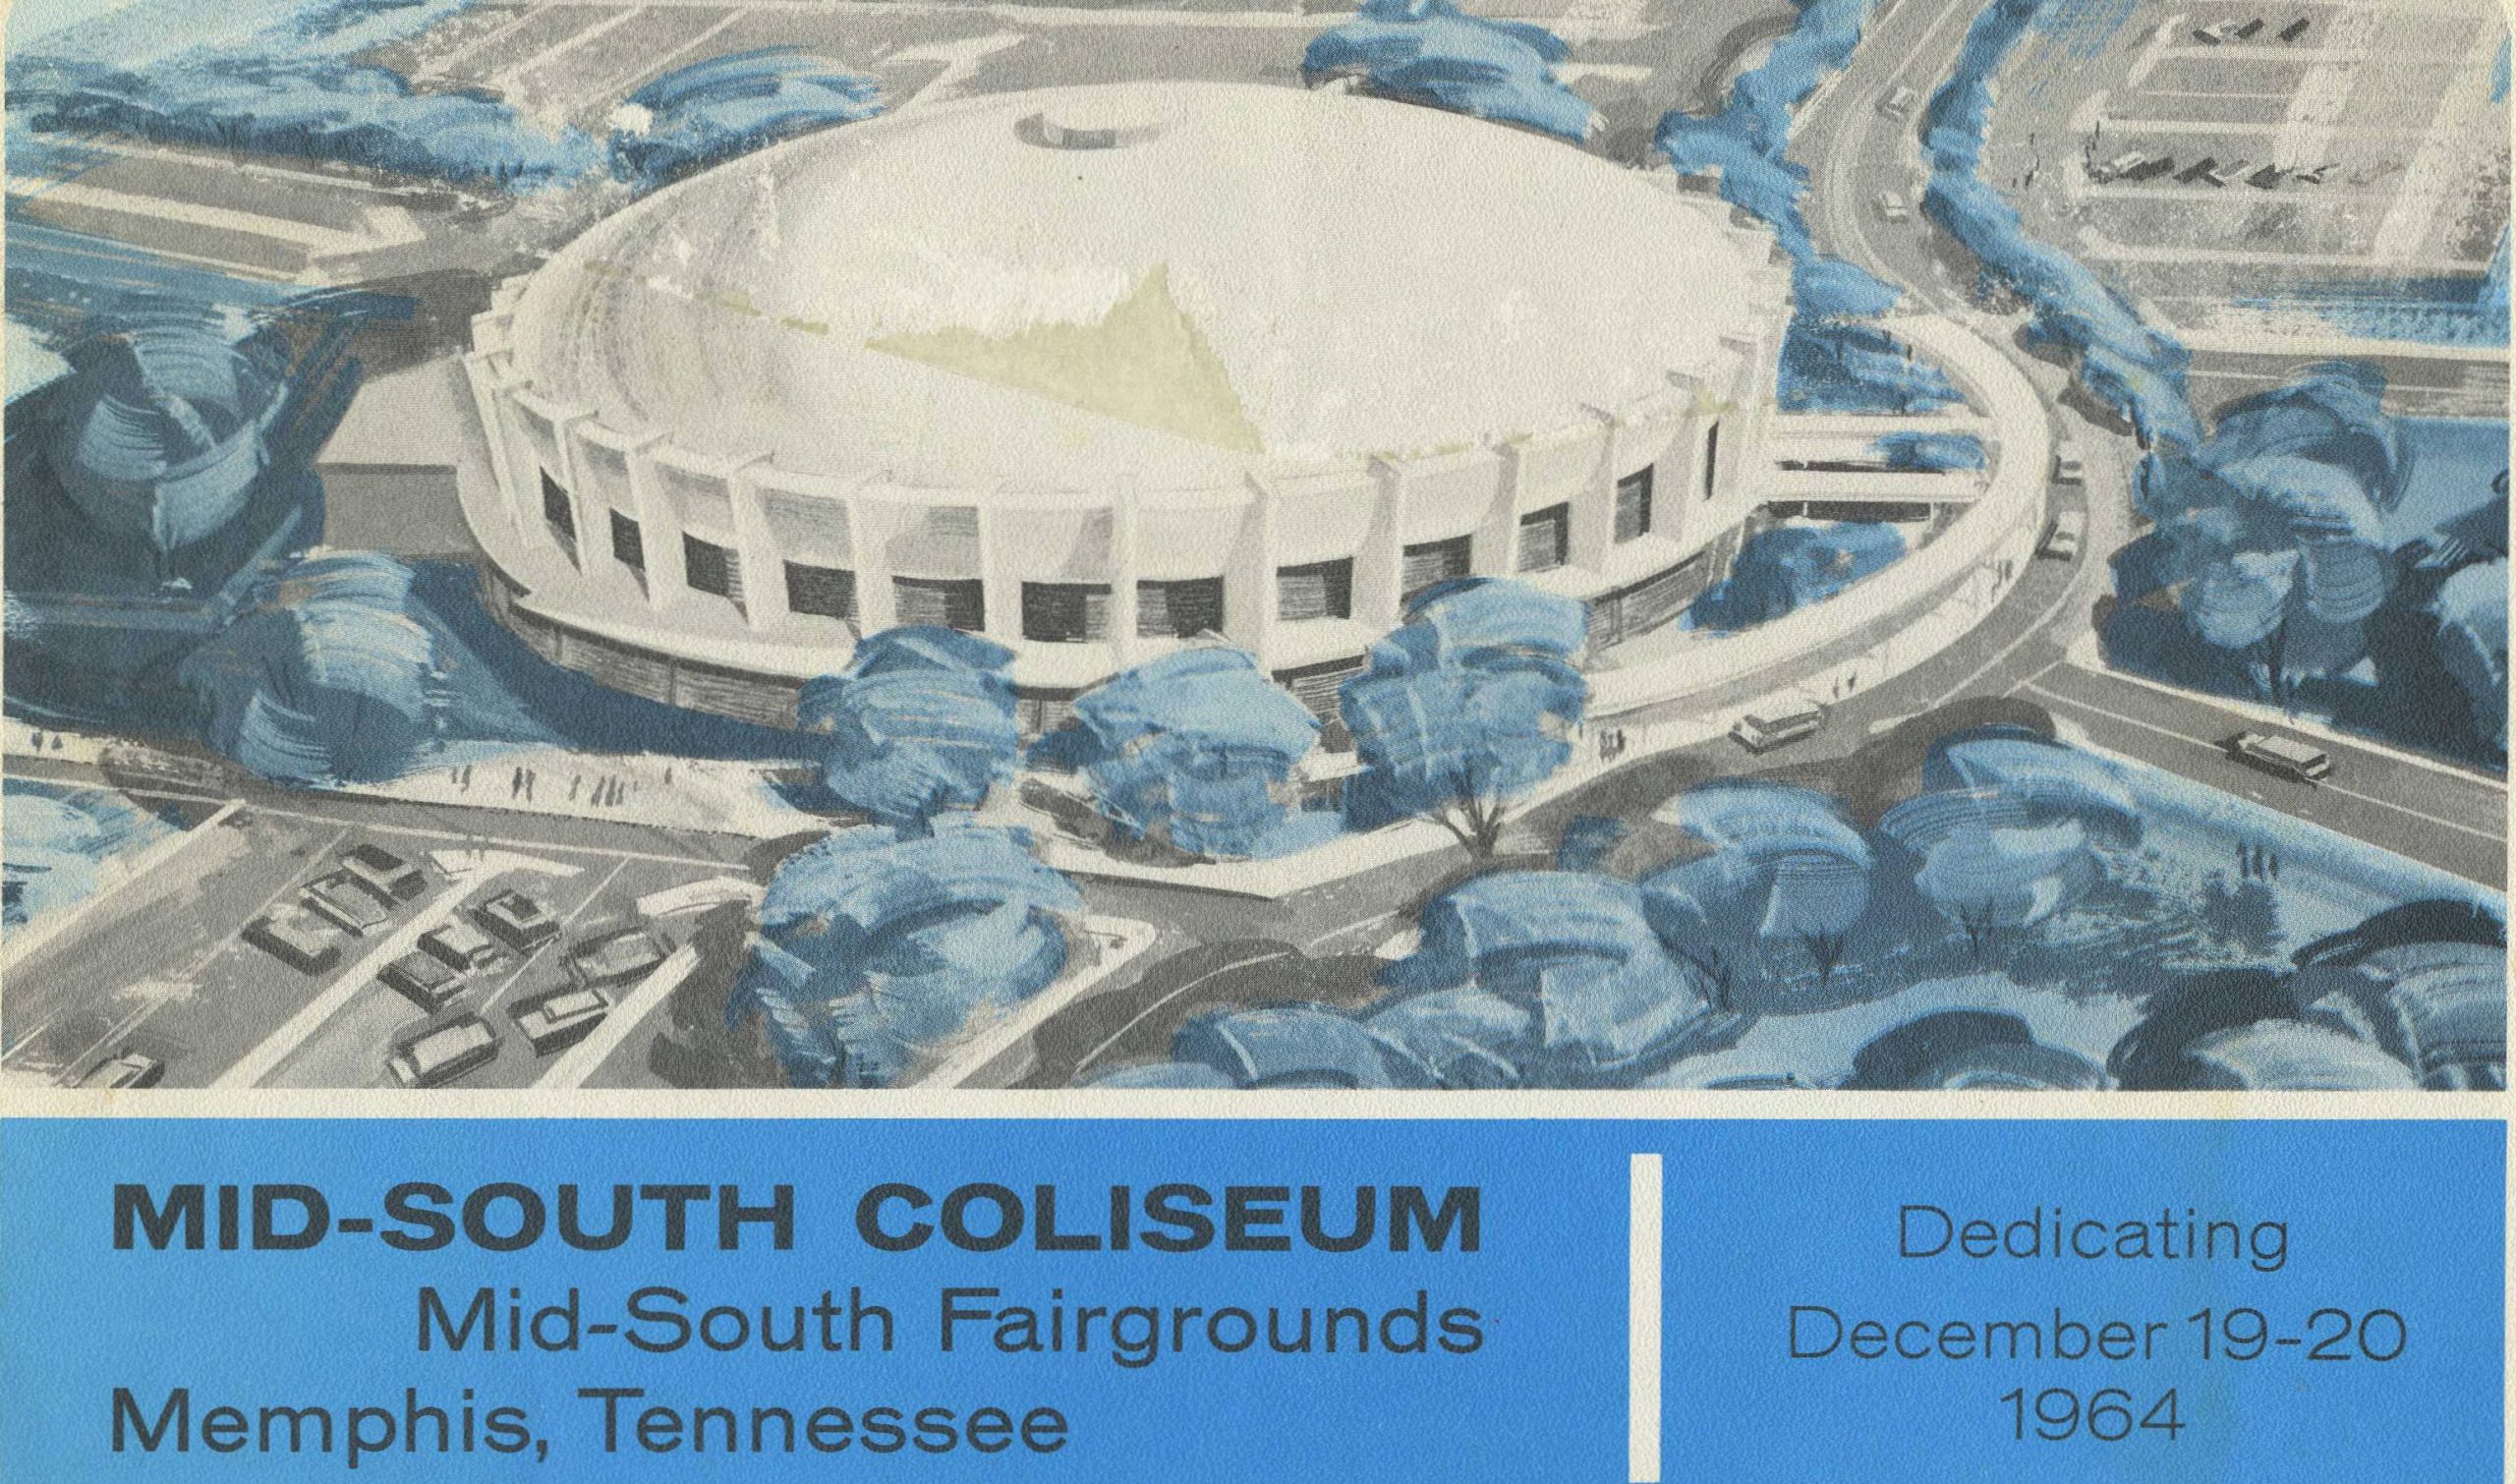 Dave Stewart has plan for Coliseum site